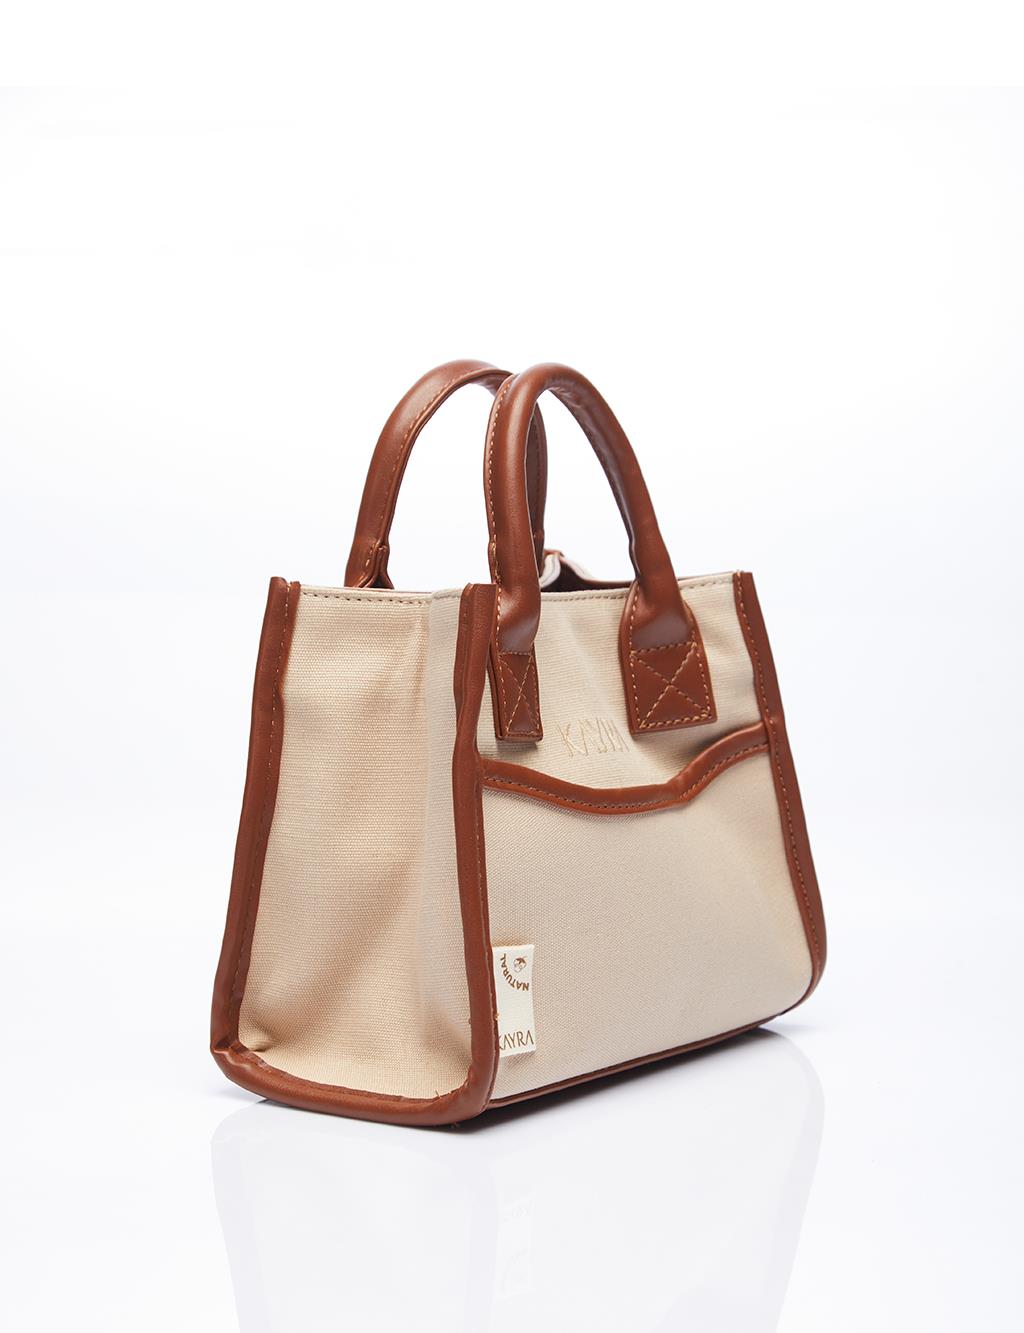 Leather Mixed Tote Bag Beige-Camel